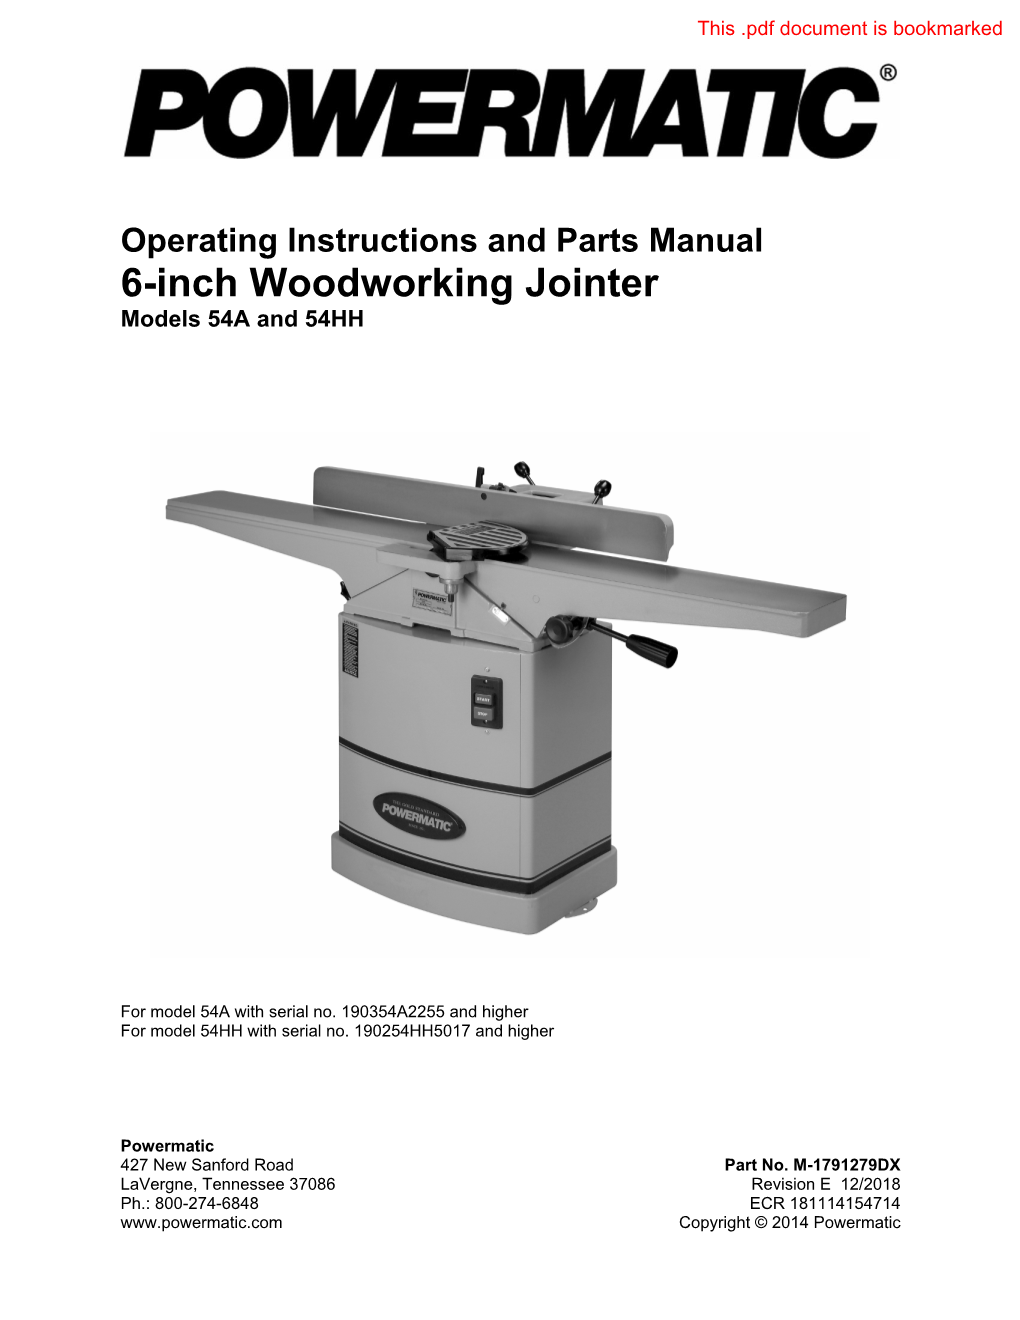 Operating Instructions and Parts Manual 6-Inch Woodworking Jointer Models 54A and 54HH